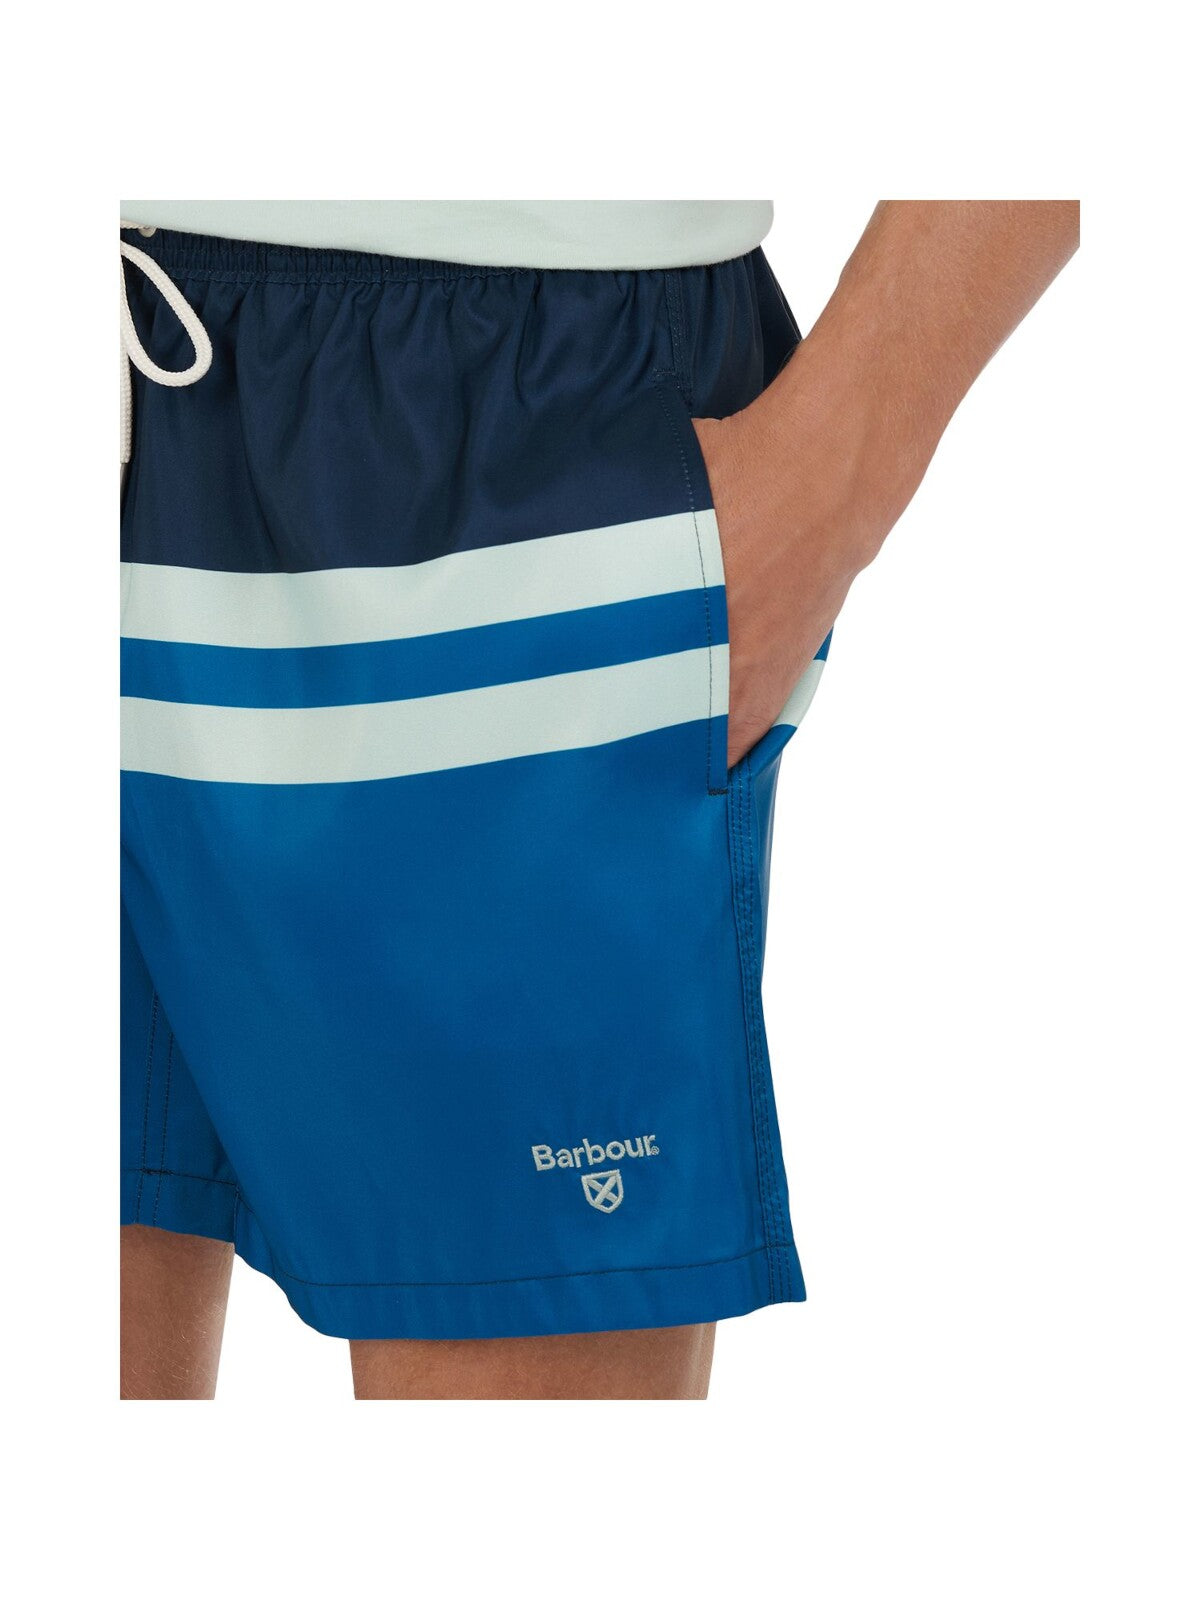 BARBOUR Mens Swimwear Navy Color Block Classic Fit Stretch Shorts S